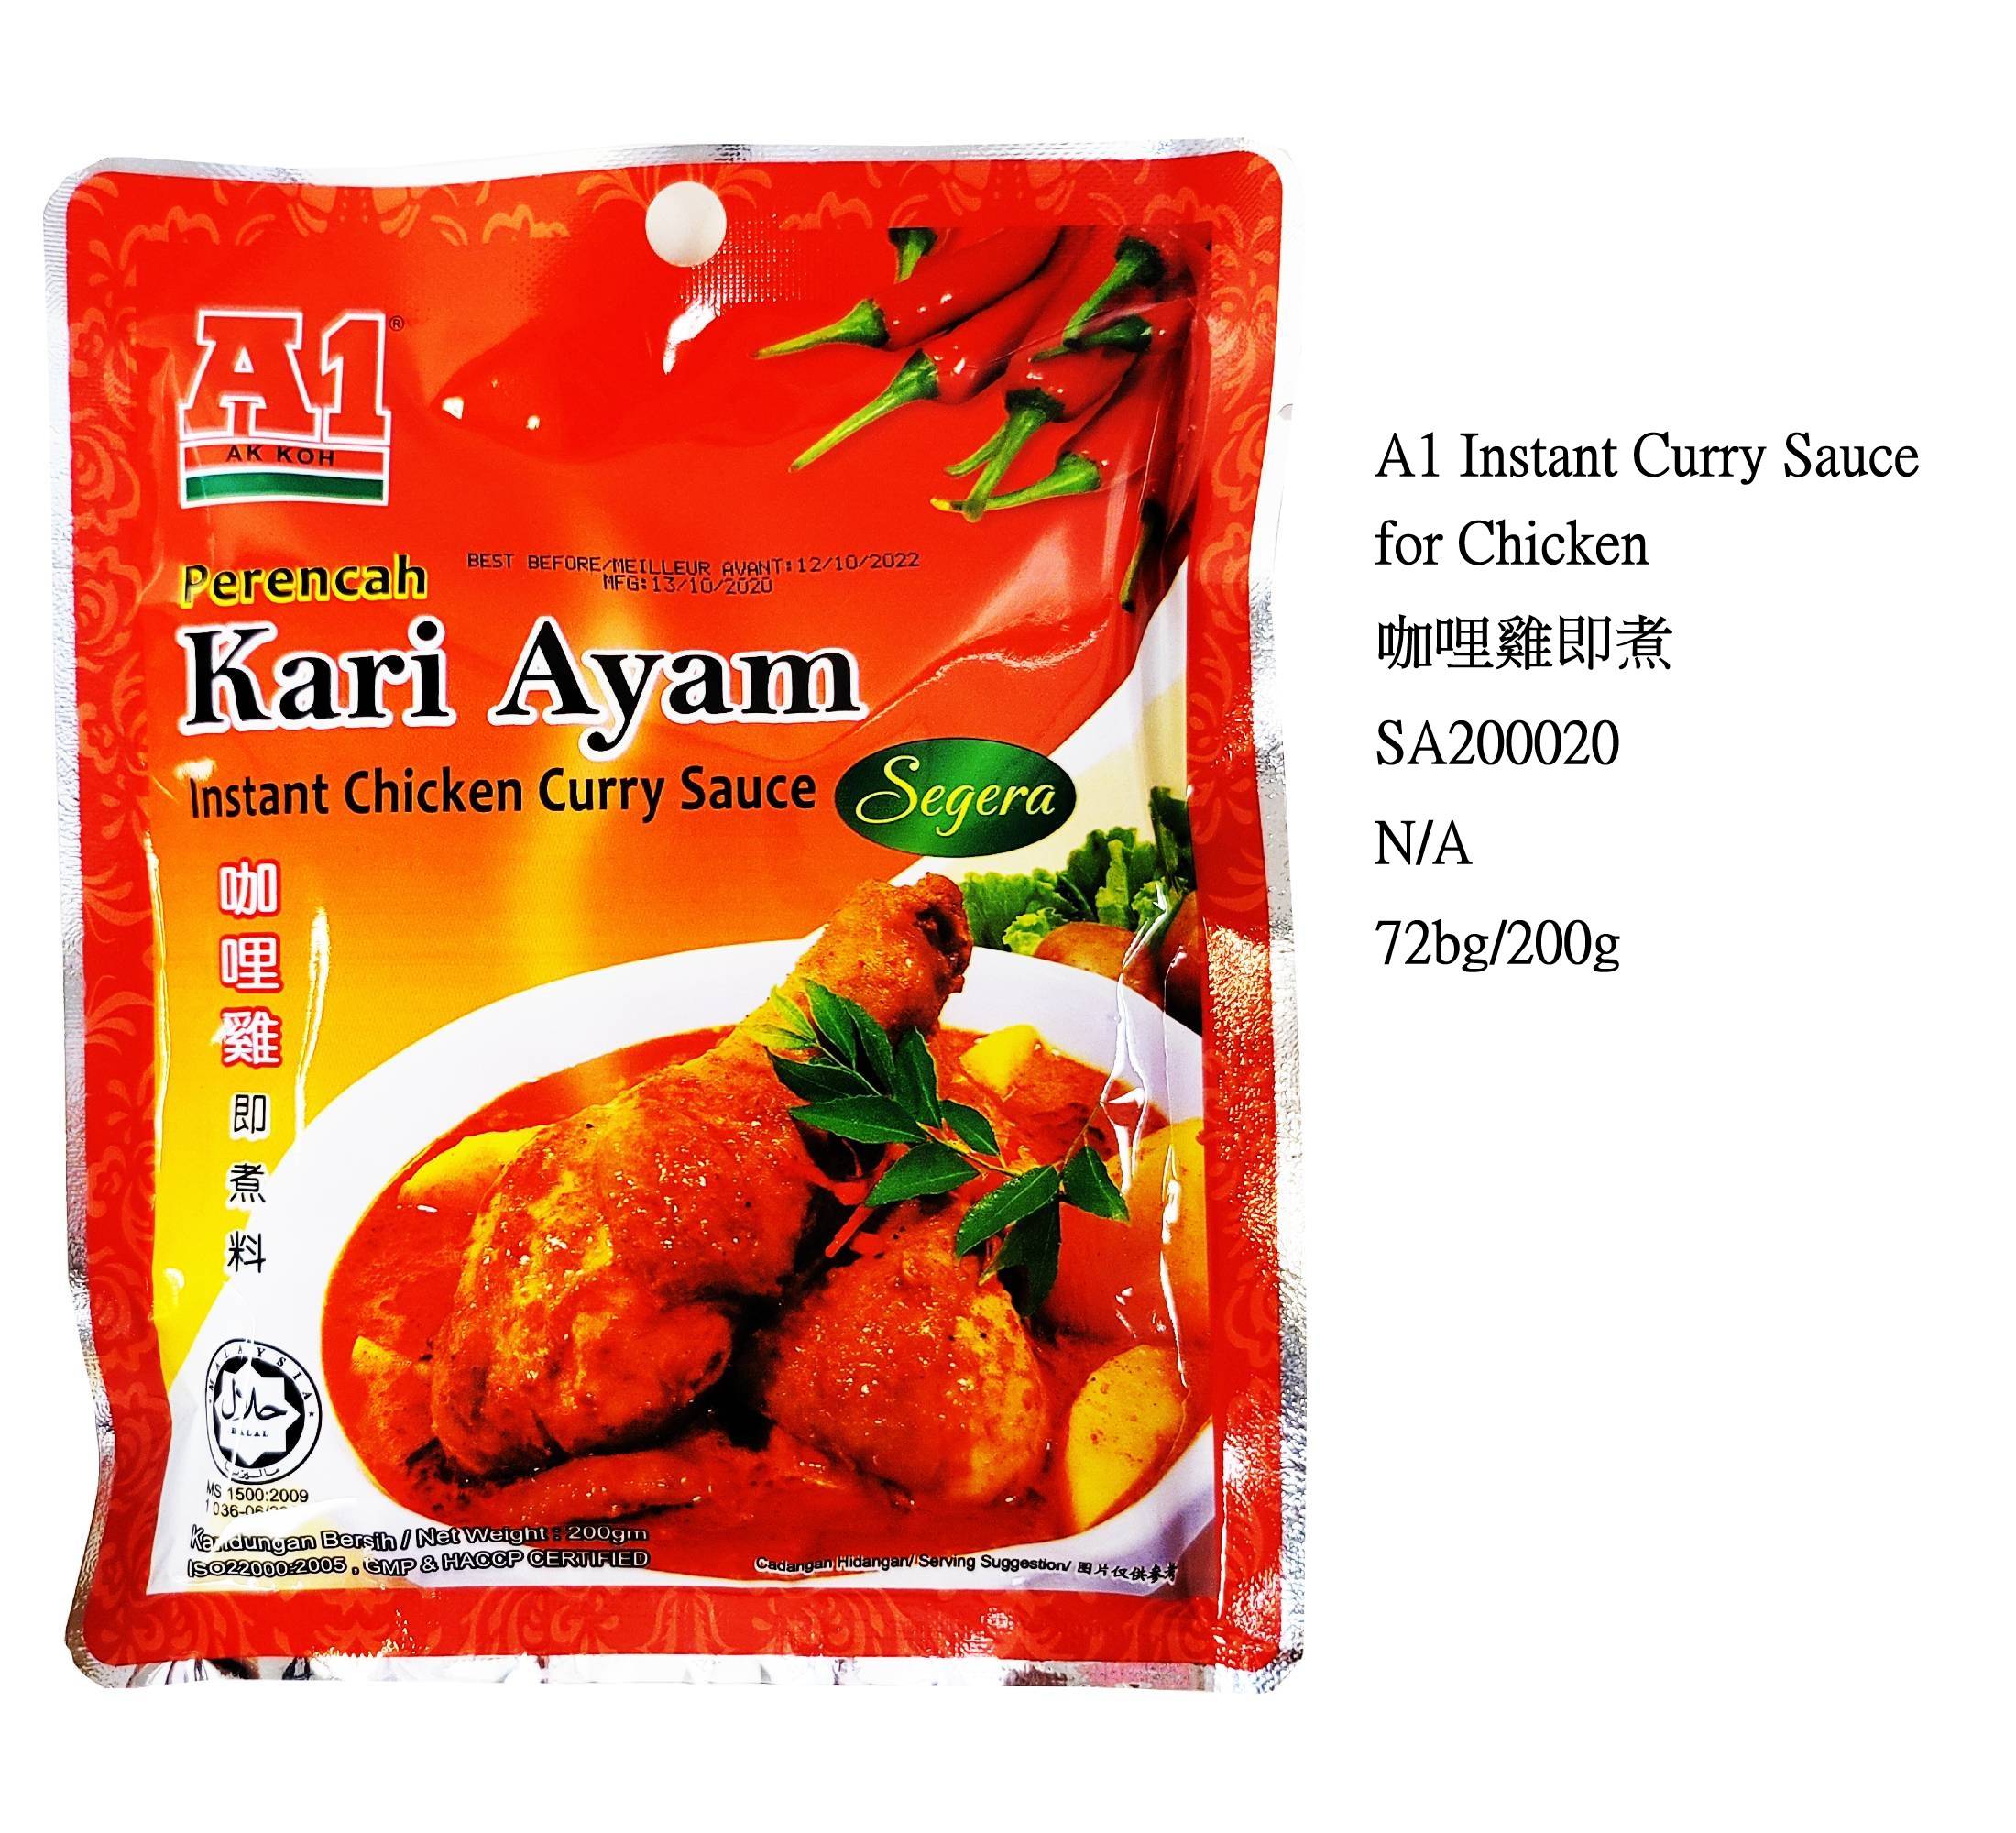 A1 INSTANT CURRY SAUCE FOR CHICKEN SA200020